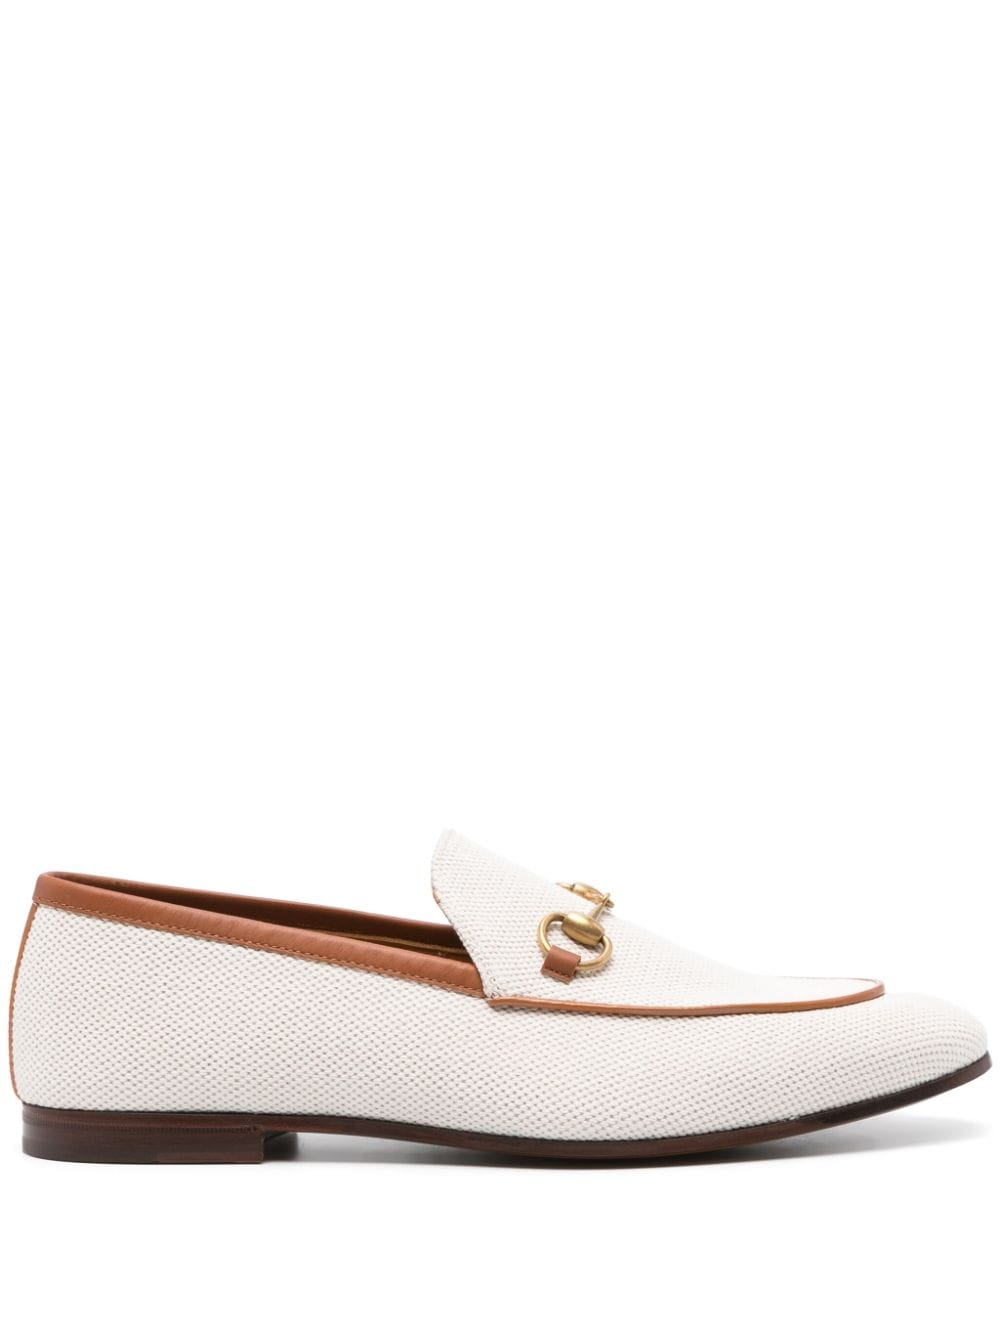 Gucci Horsebit-embellished loafers - White von Gucci